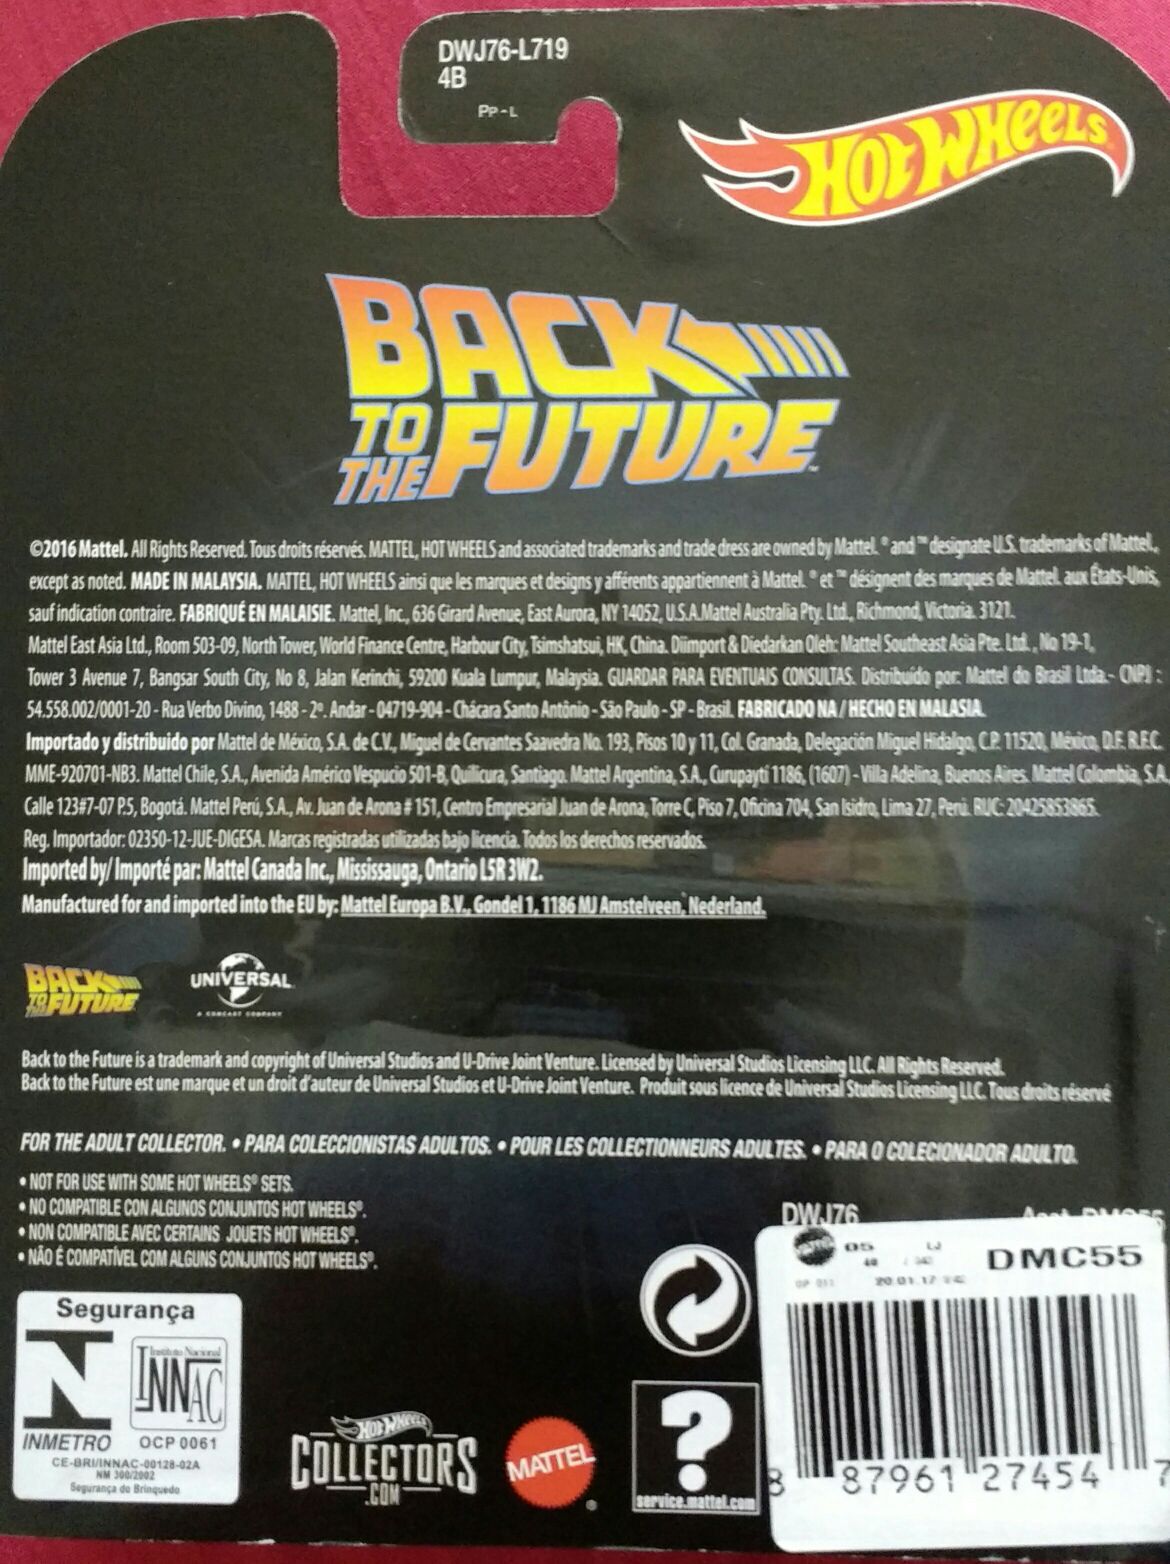 Time Machine Hover Mode - Back To The Future toy car collectible - Main Image 2